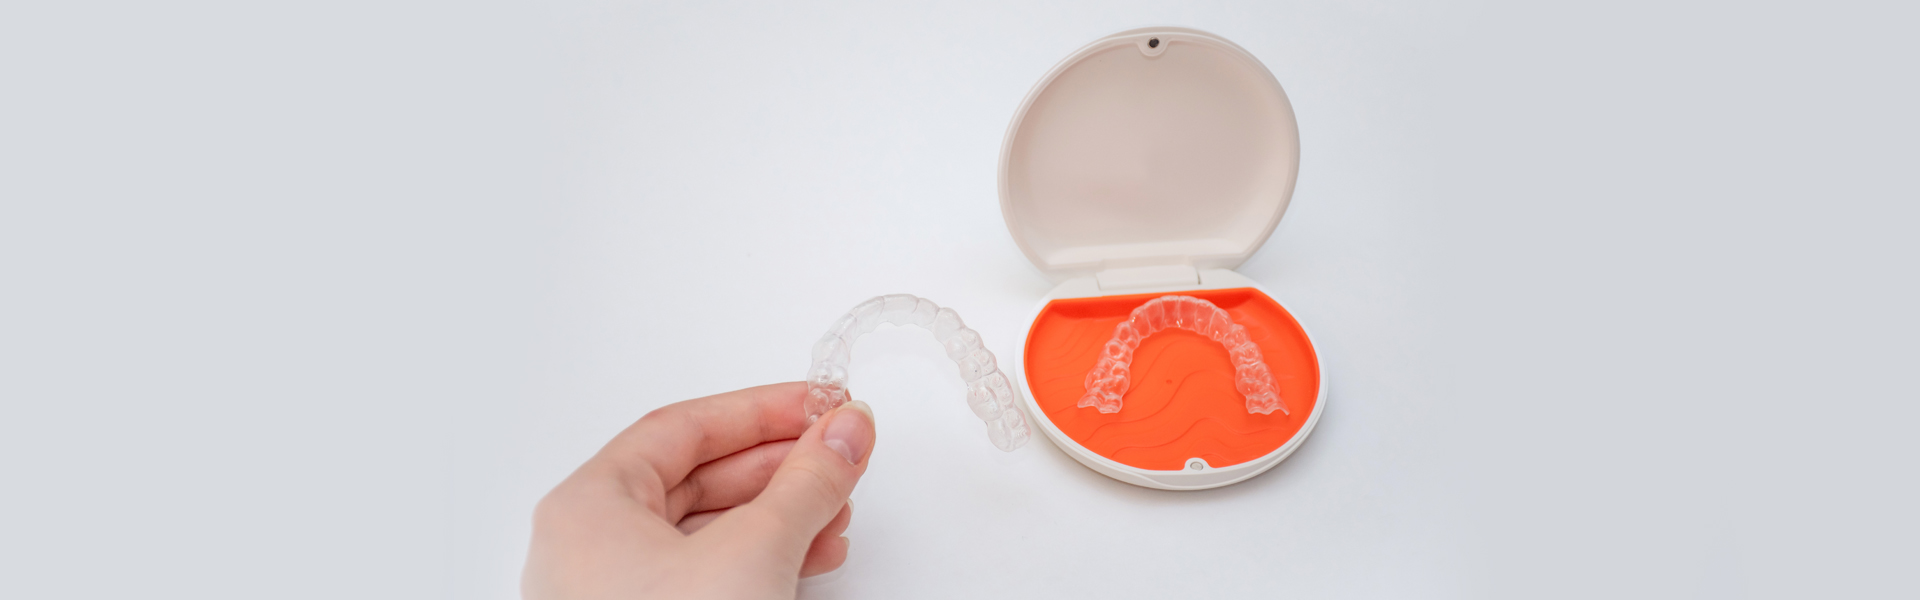 What Is Invisalign: Process, Cost, Benefits & After-Care Tips